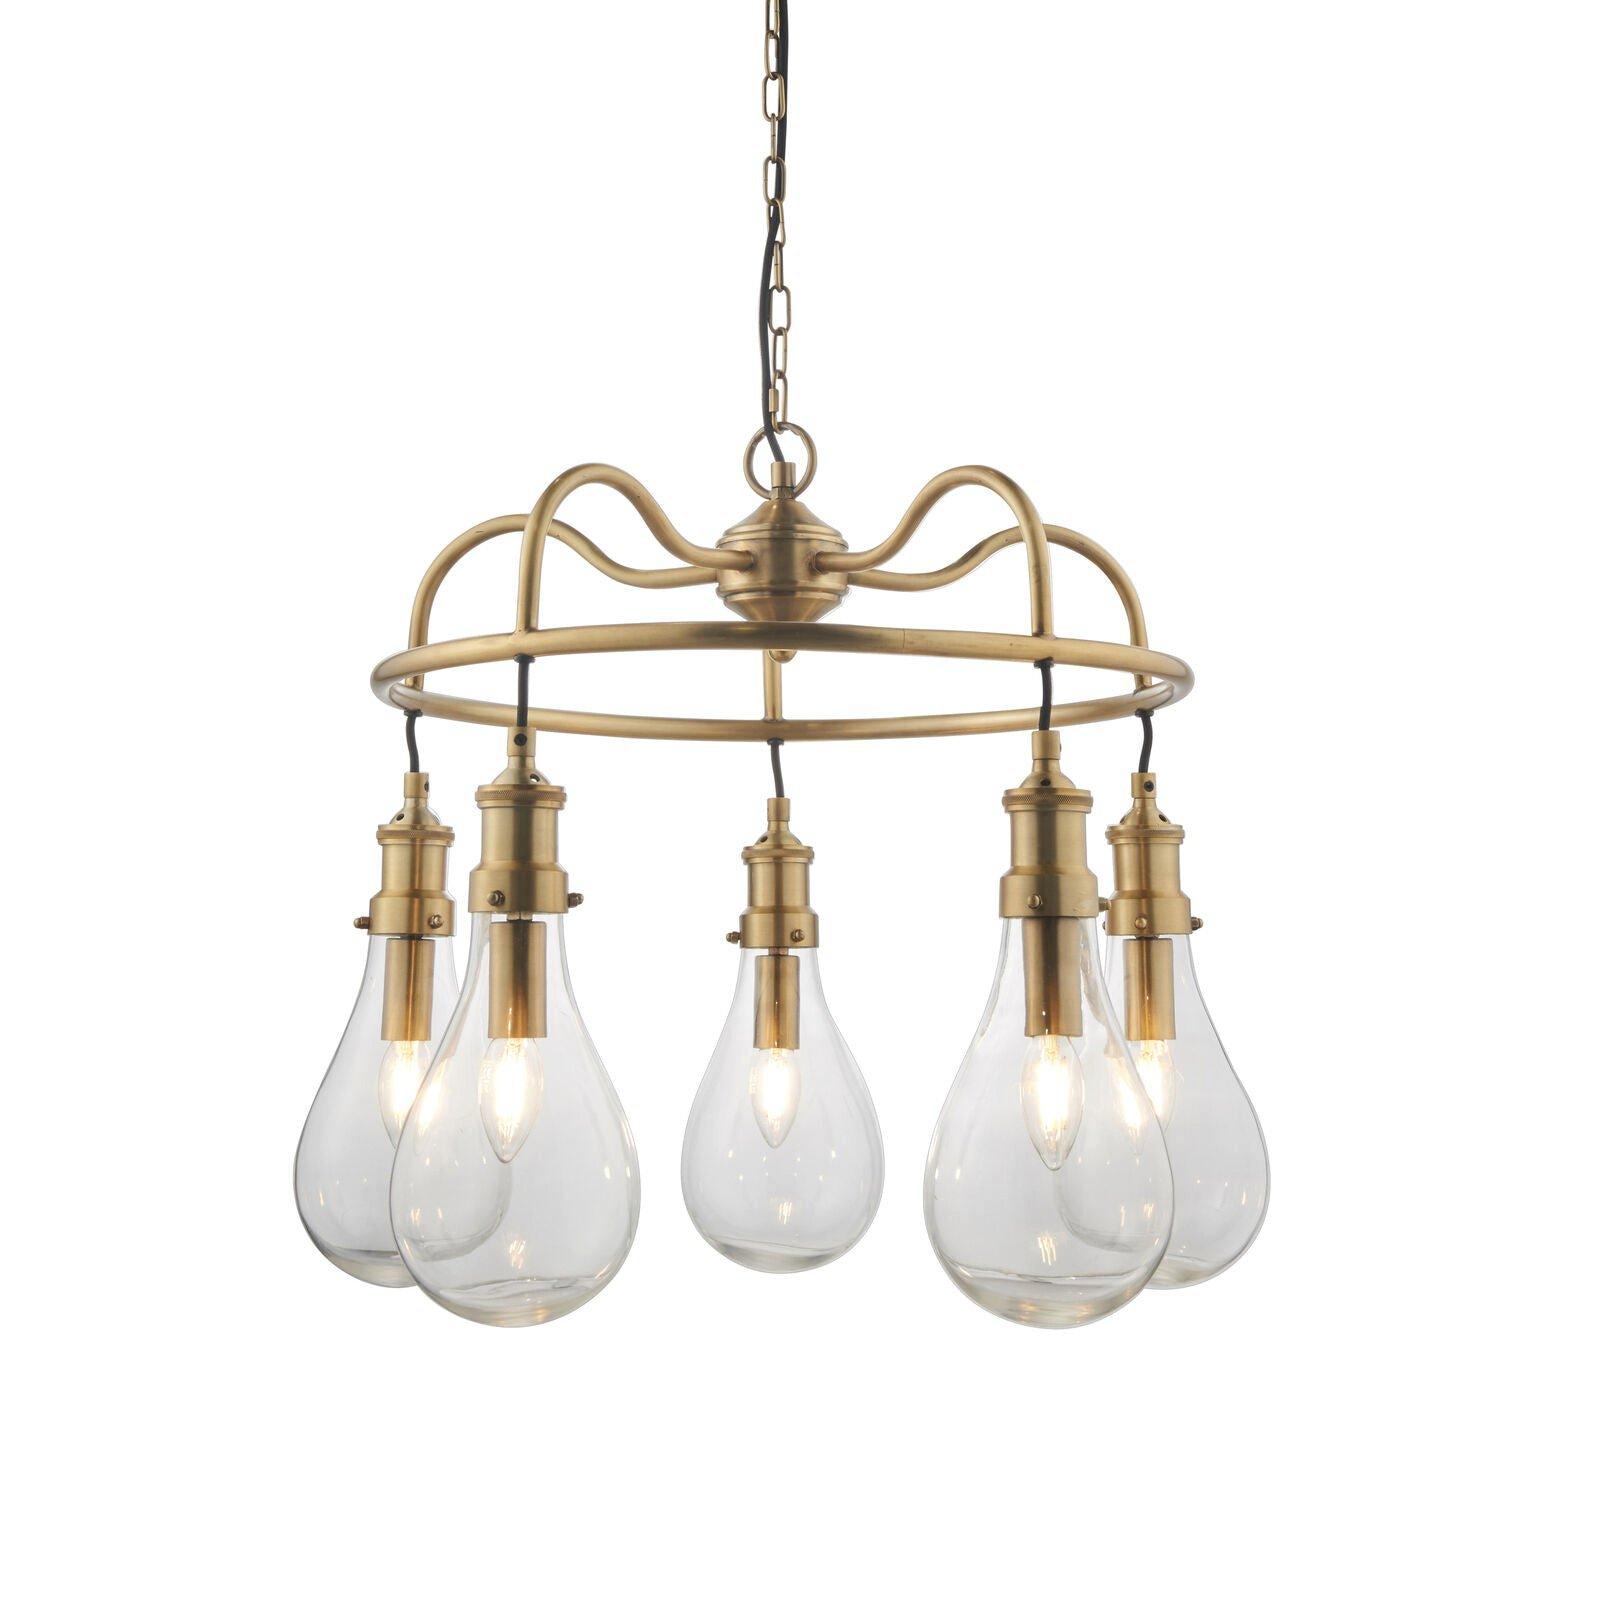 Ceiling Pendant Light - Antique Brass Plate & Clear Glass - 5 x 6W LED E14